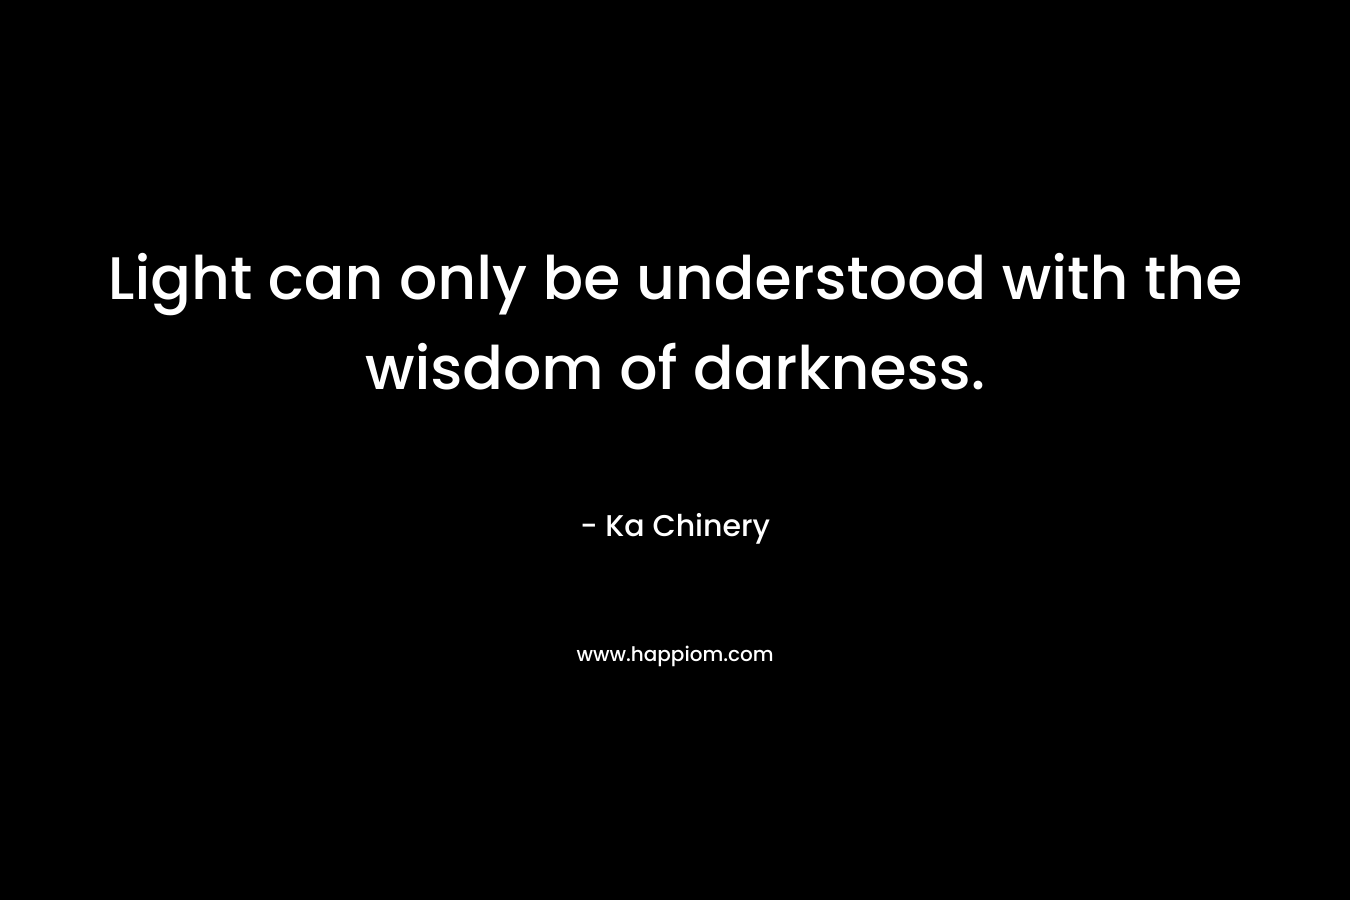 Light can only be understood with the wisdom of darkness.